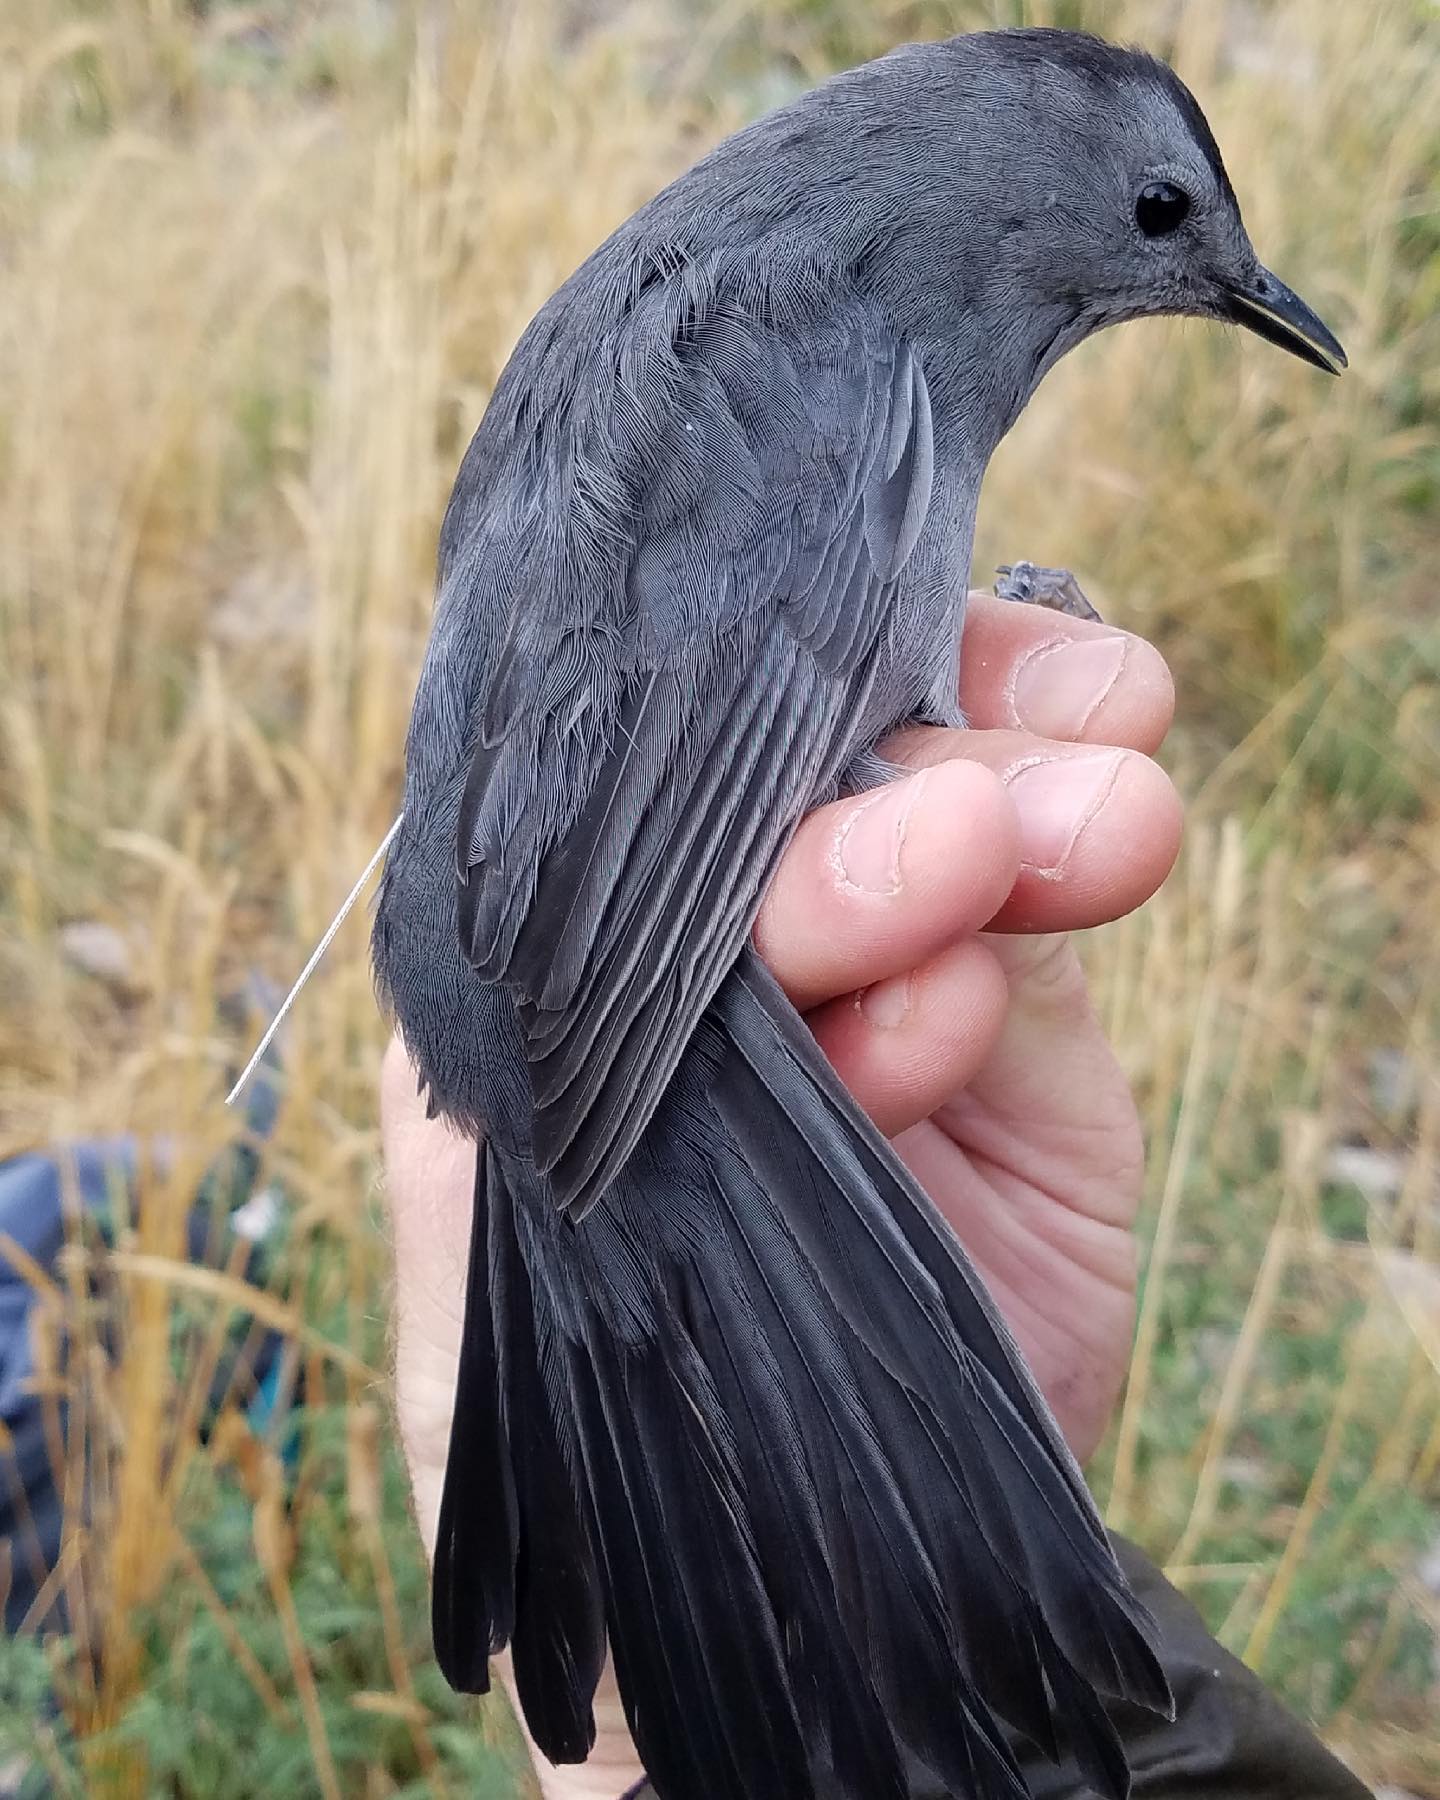 A Gray Catbird carries a GPS tracking device called a pinpoint unit.